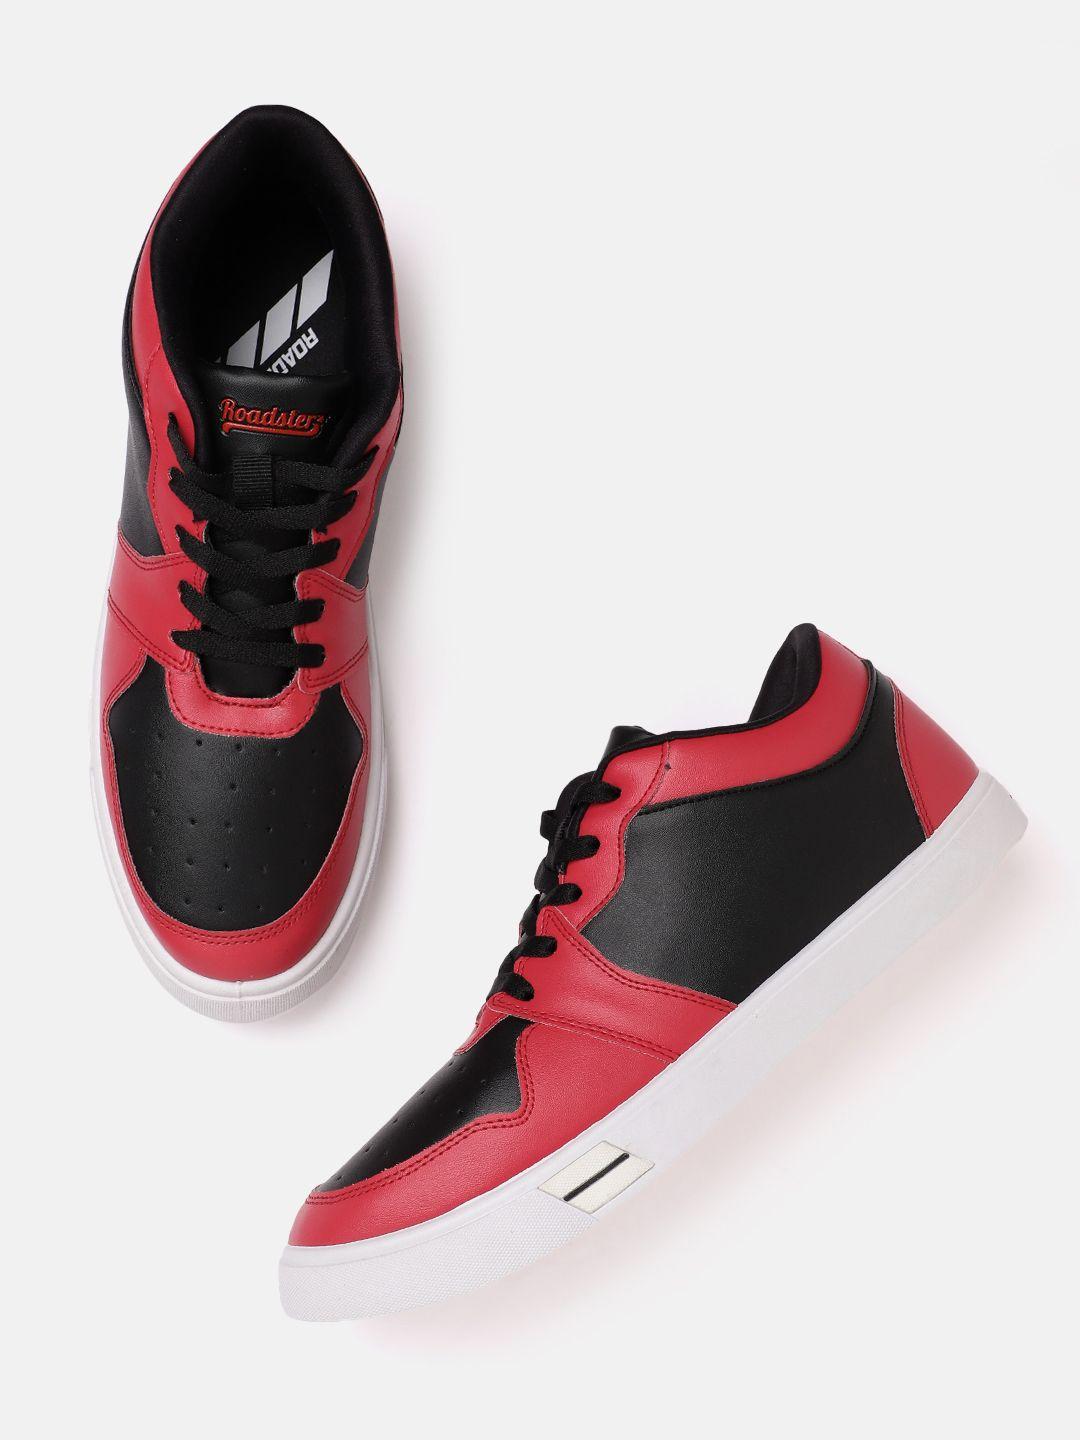 The Roadster Lifestyle Co. Men Perforated Detail Colourblocked Sneakers